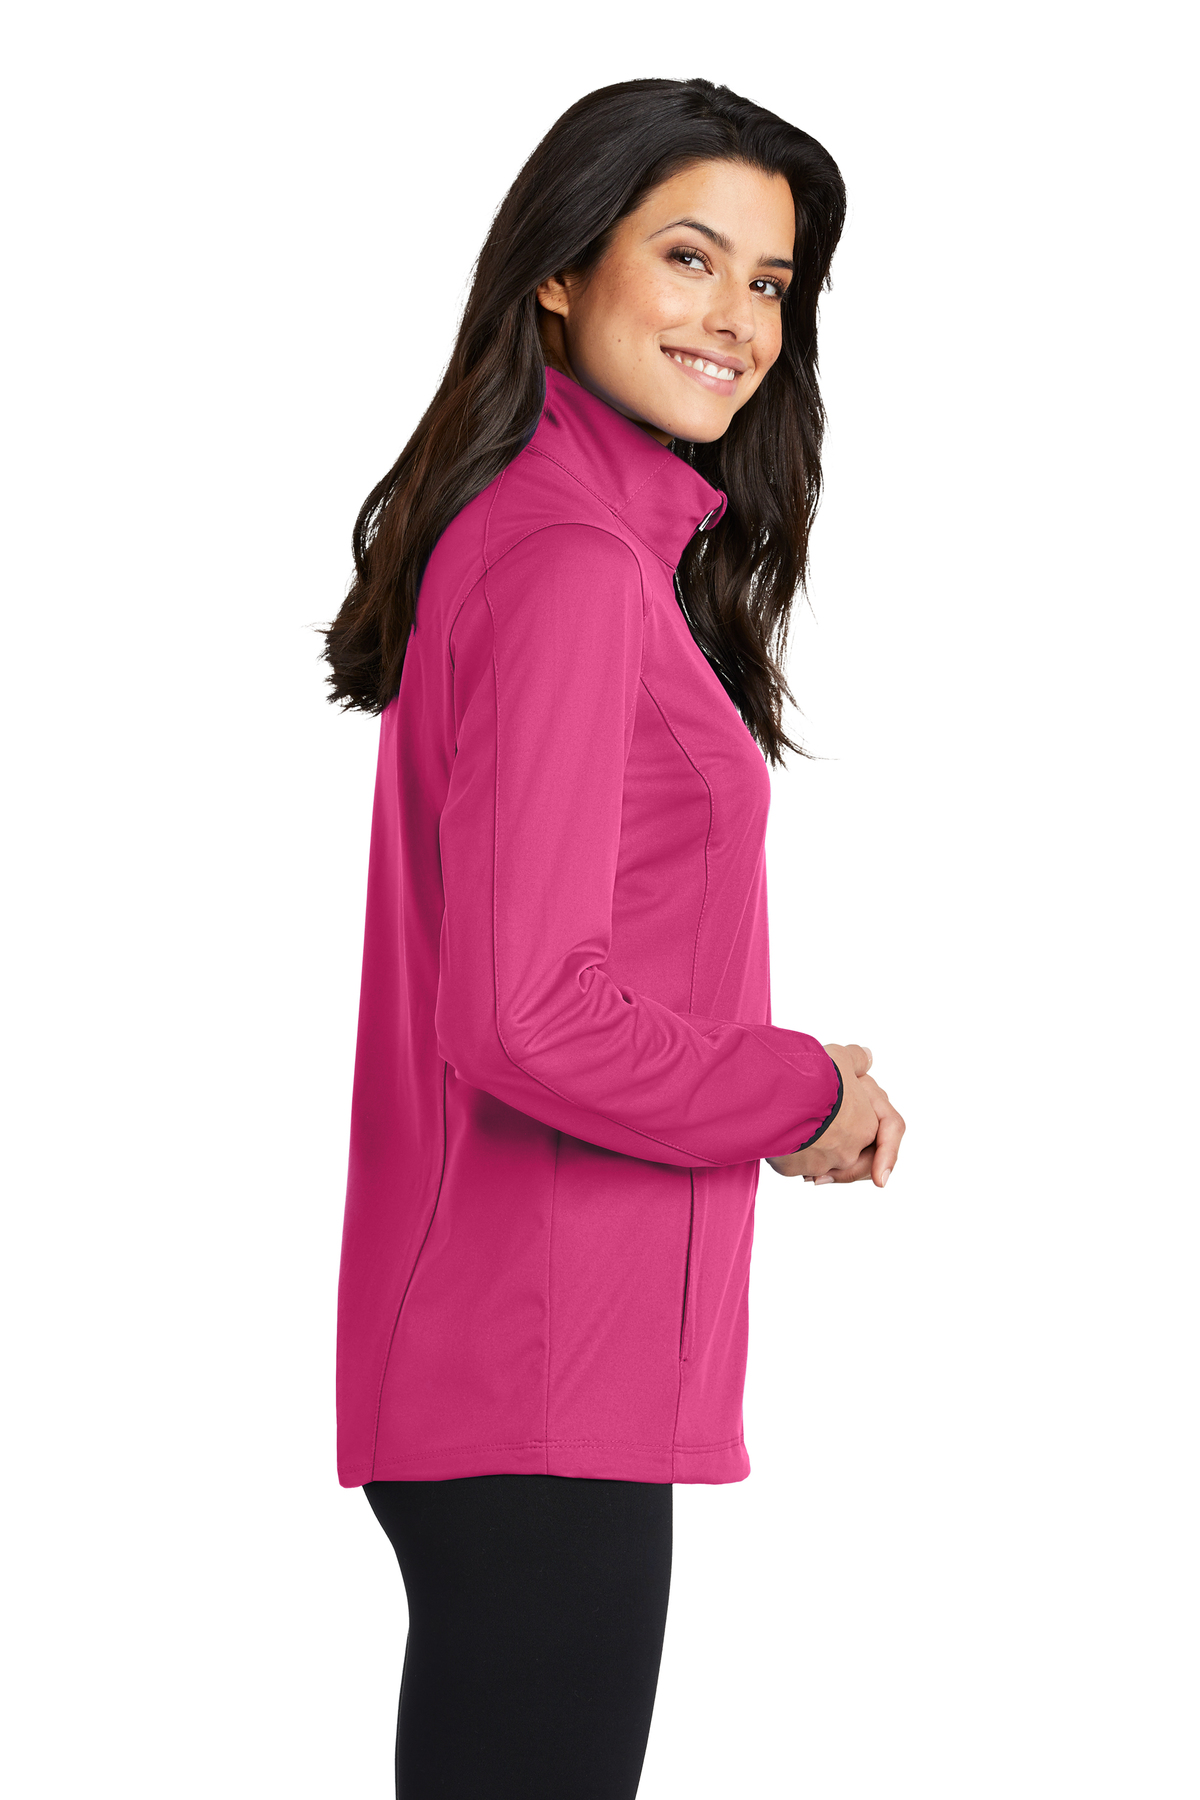 Port Authority Ladies Active Soft Shell Jacket | Product | SanMar